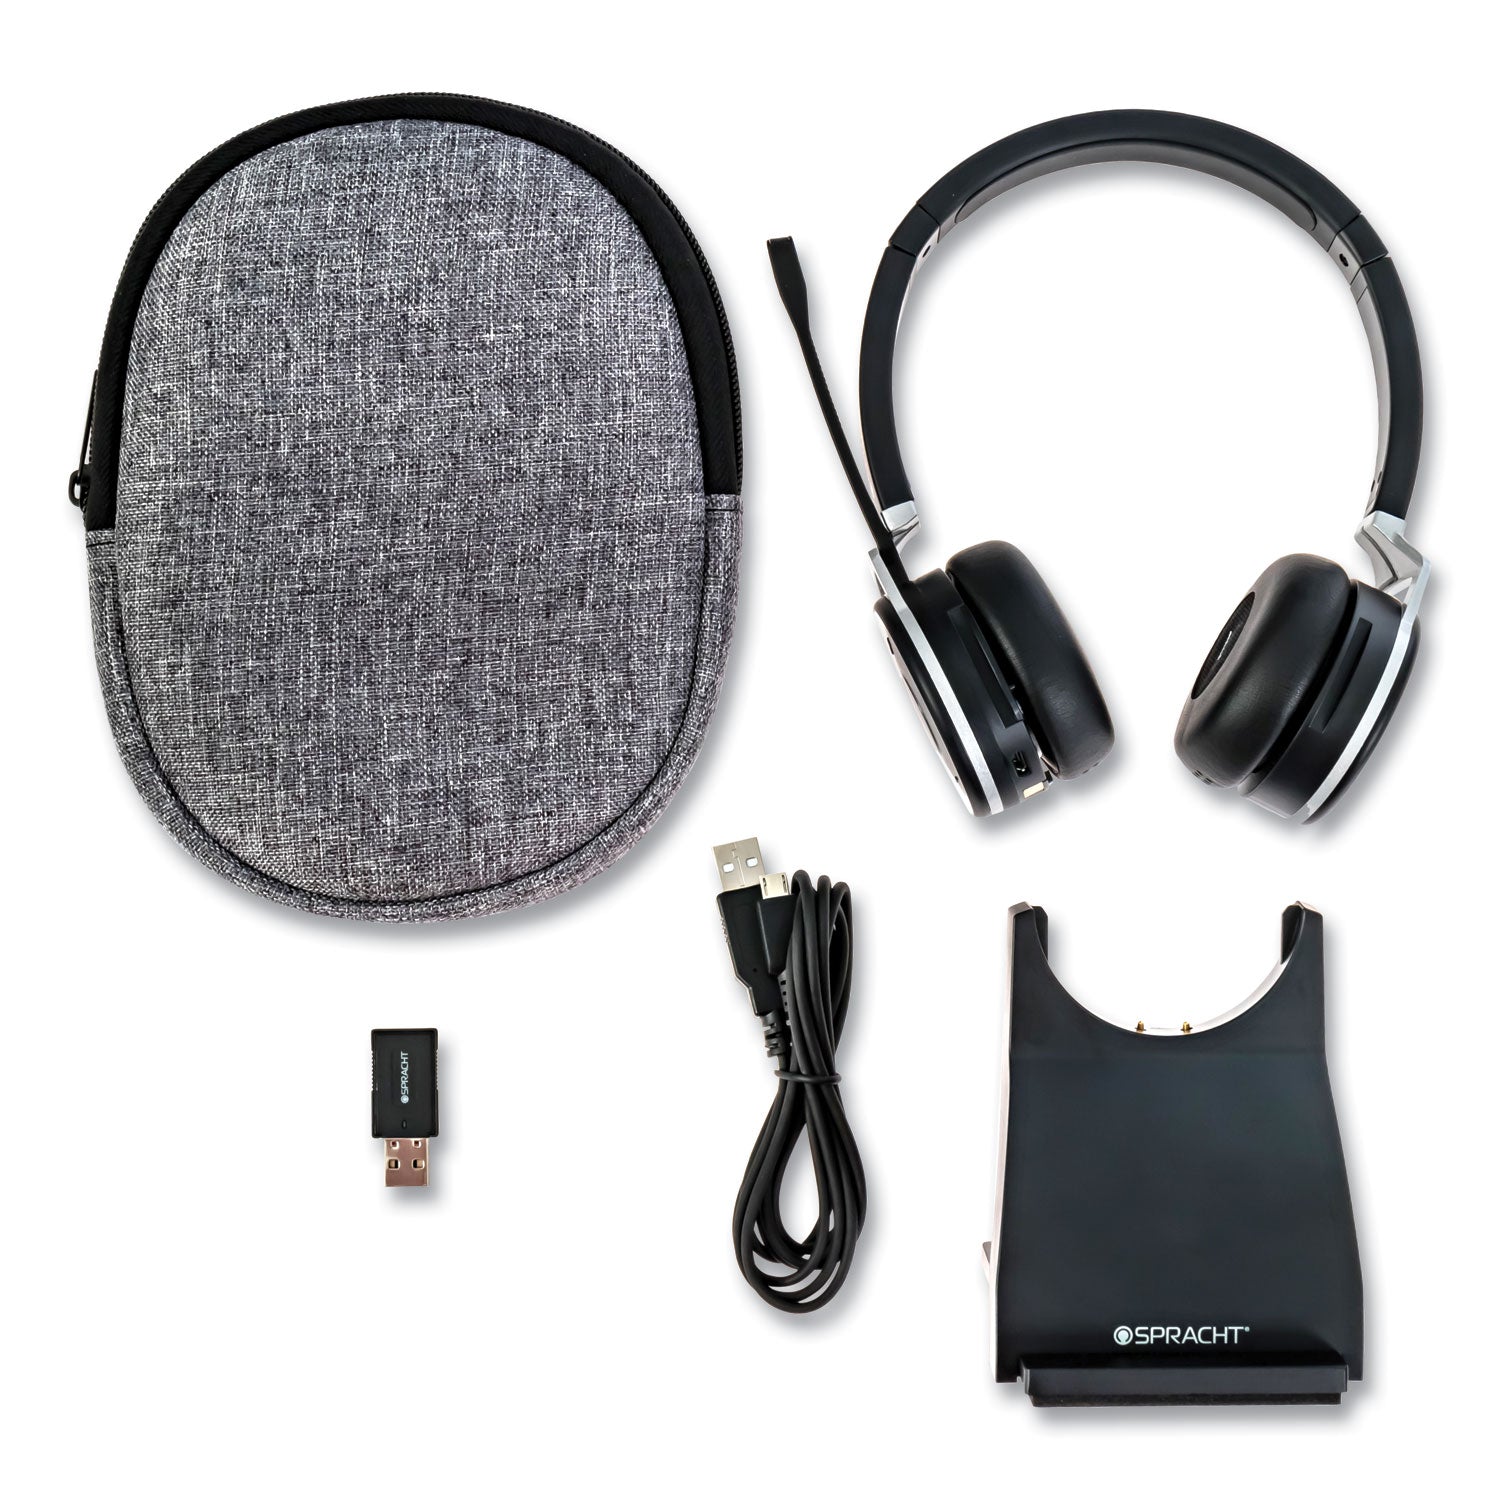 Spracht Prestige Combo Headset - USB - Wired/Wireless - Bluetooth - 33 ft - Over-the-head - Noise Cancelling Microphone - Black - 1